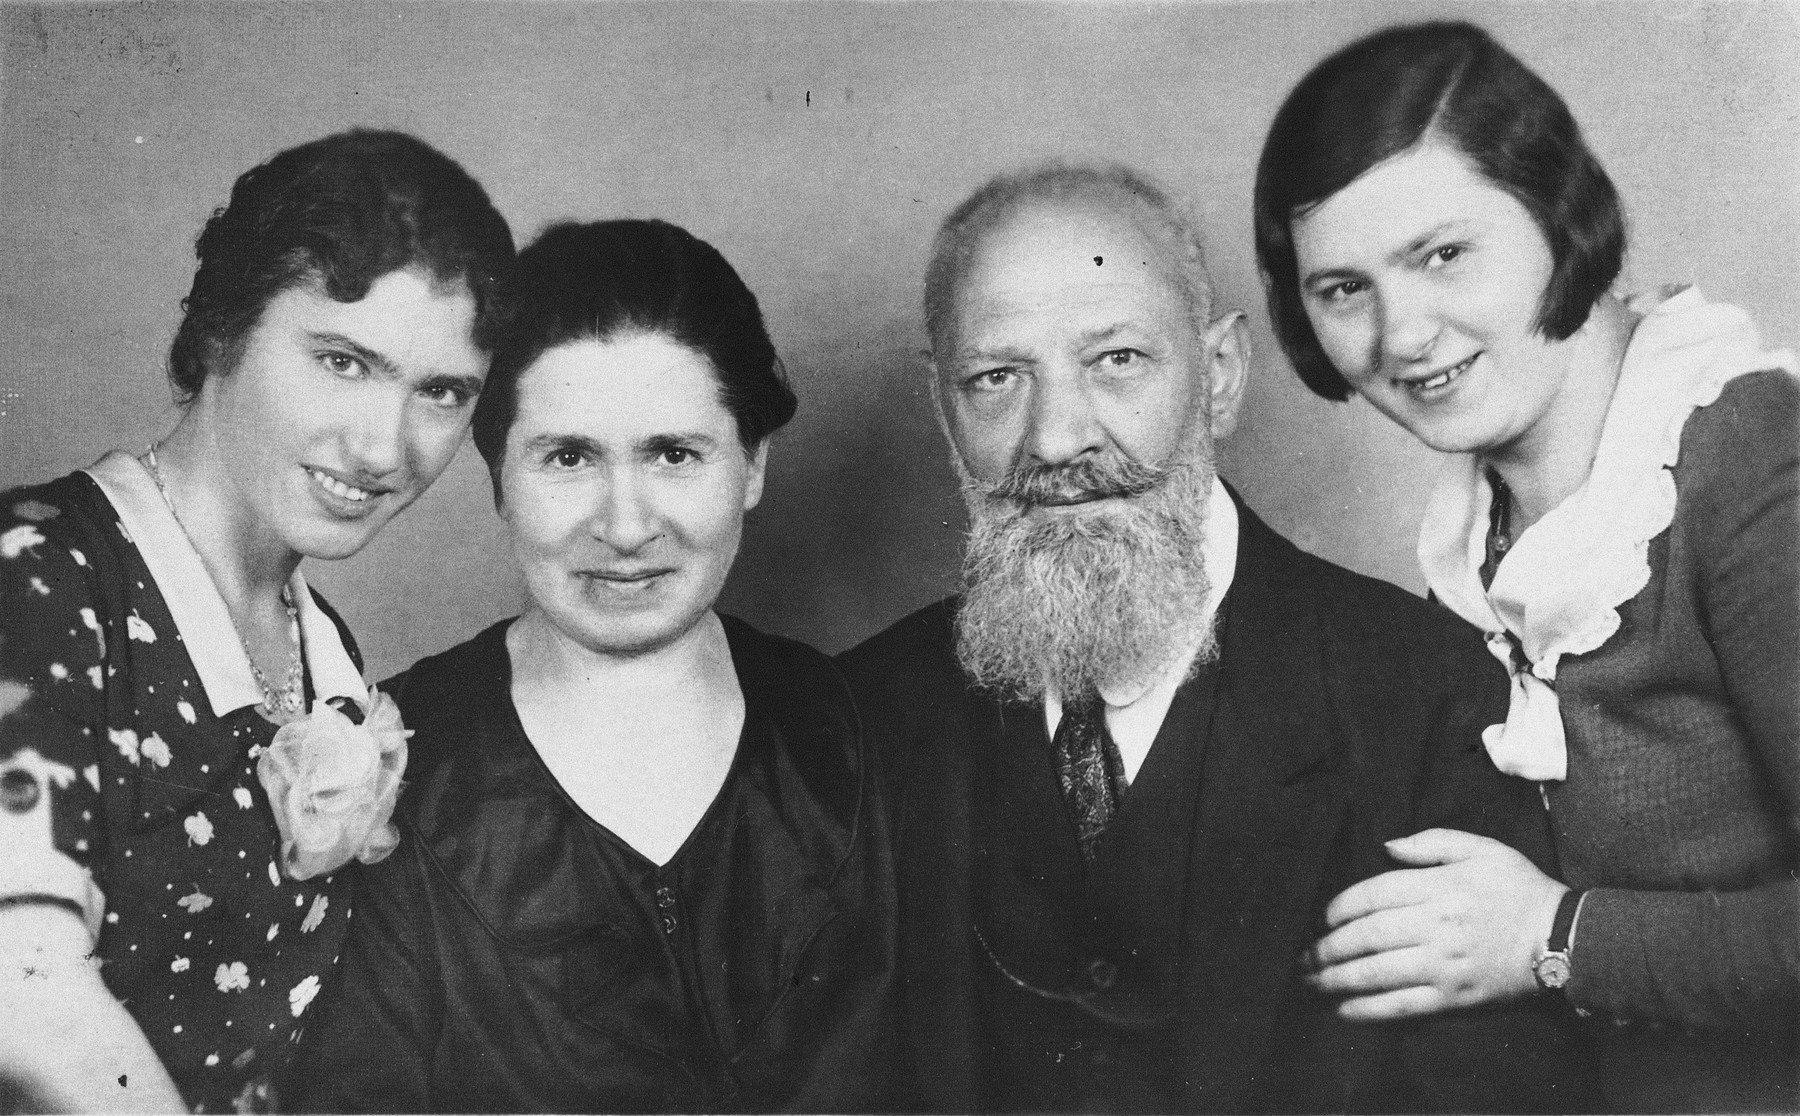 Portrait of the Roth family from Wiesbaden Germany.

Helene Roth (later Cohen) is on the far left.  Her parents are in the center and her sister is on the right.